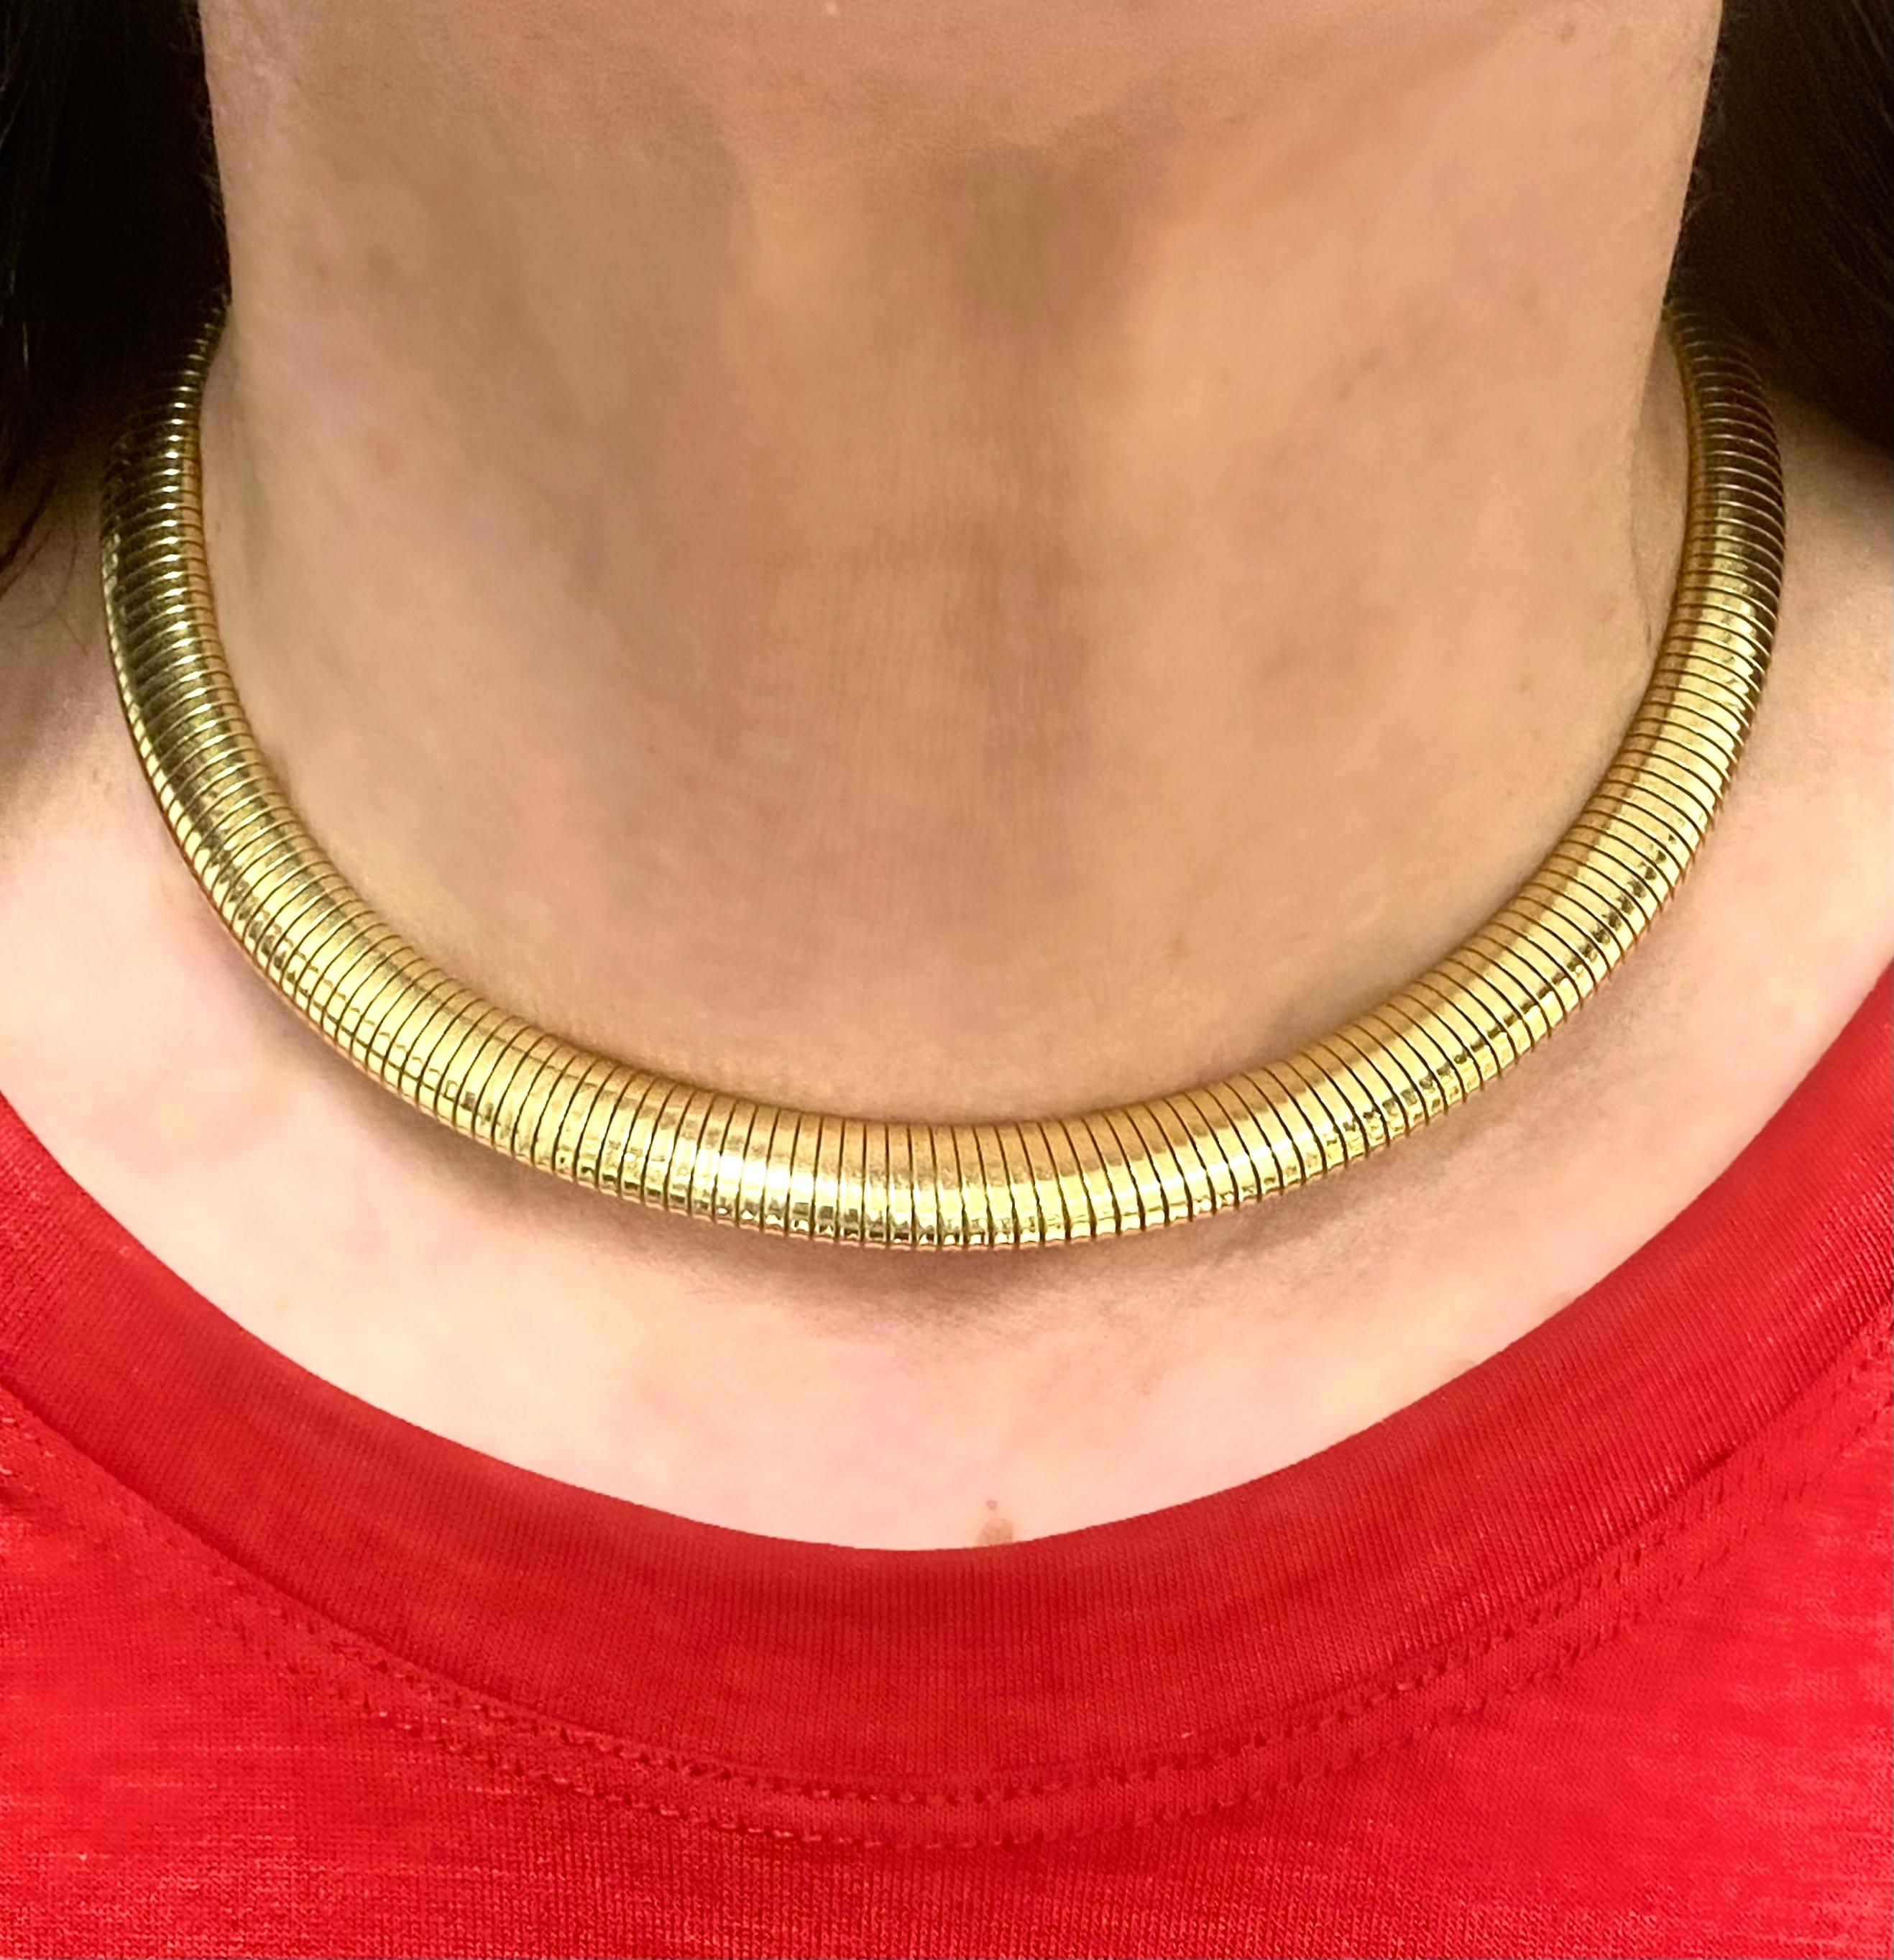 A Retro 14k gold necklace by the Forstner jewelry company, made in a sleek tubogas design. Due to a well-balanced thickness, the necklace creates a slim, elegant line on a neck. It’s an amazing everyday piece that can be dressed-up by adding a